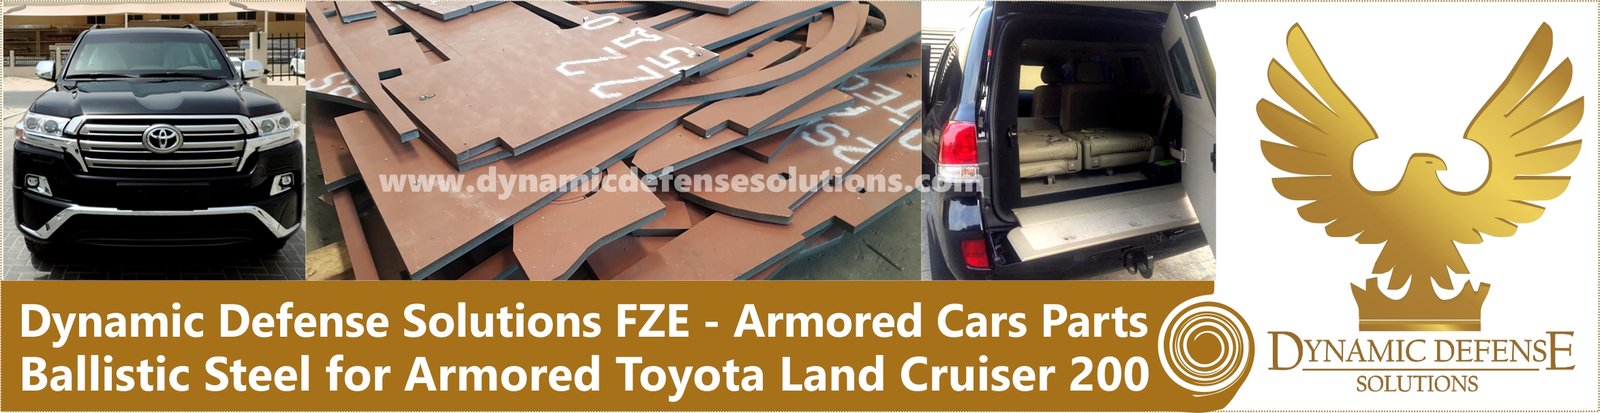 Dynamic Defense Solutions, Ballistic Steel Armored Toyota Land Cruiser, armored cars, armored cars uae, armoured vehicles, bulletproof car, armoring companies,